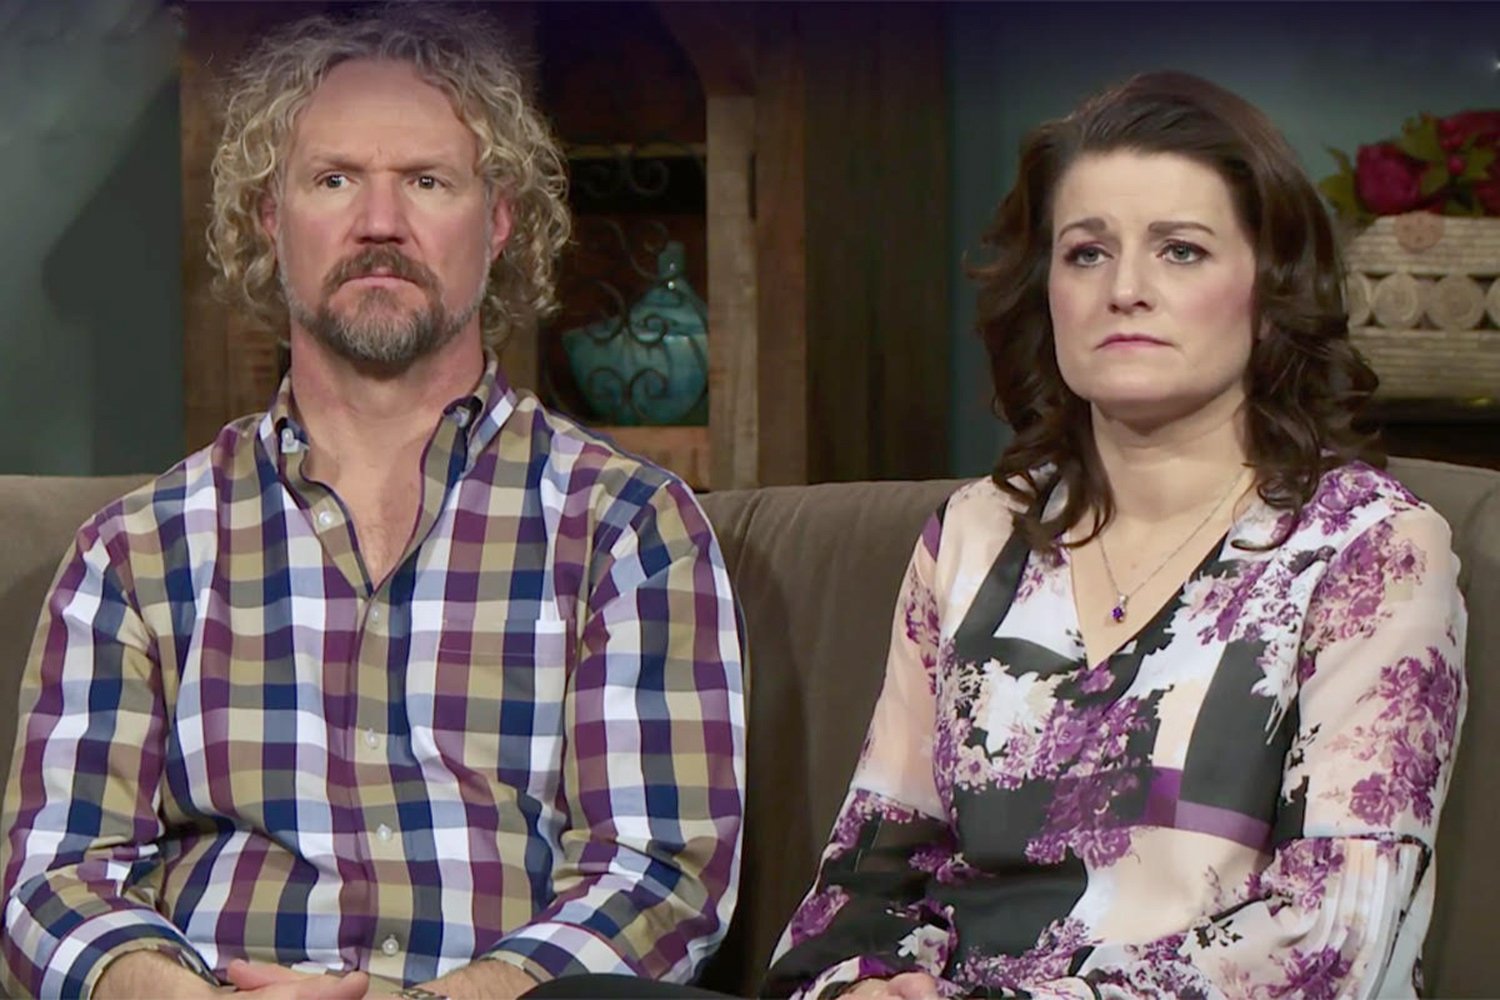 Kody Brown and Robyn Brown sit together in an interview on 'Sister Wives’ on TLC.